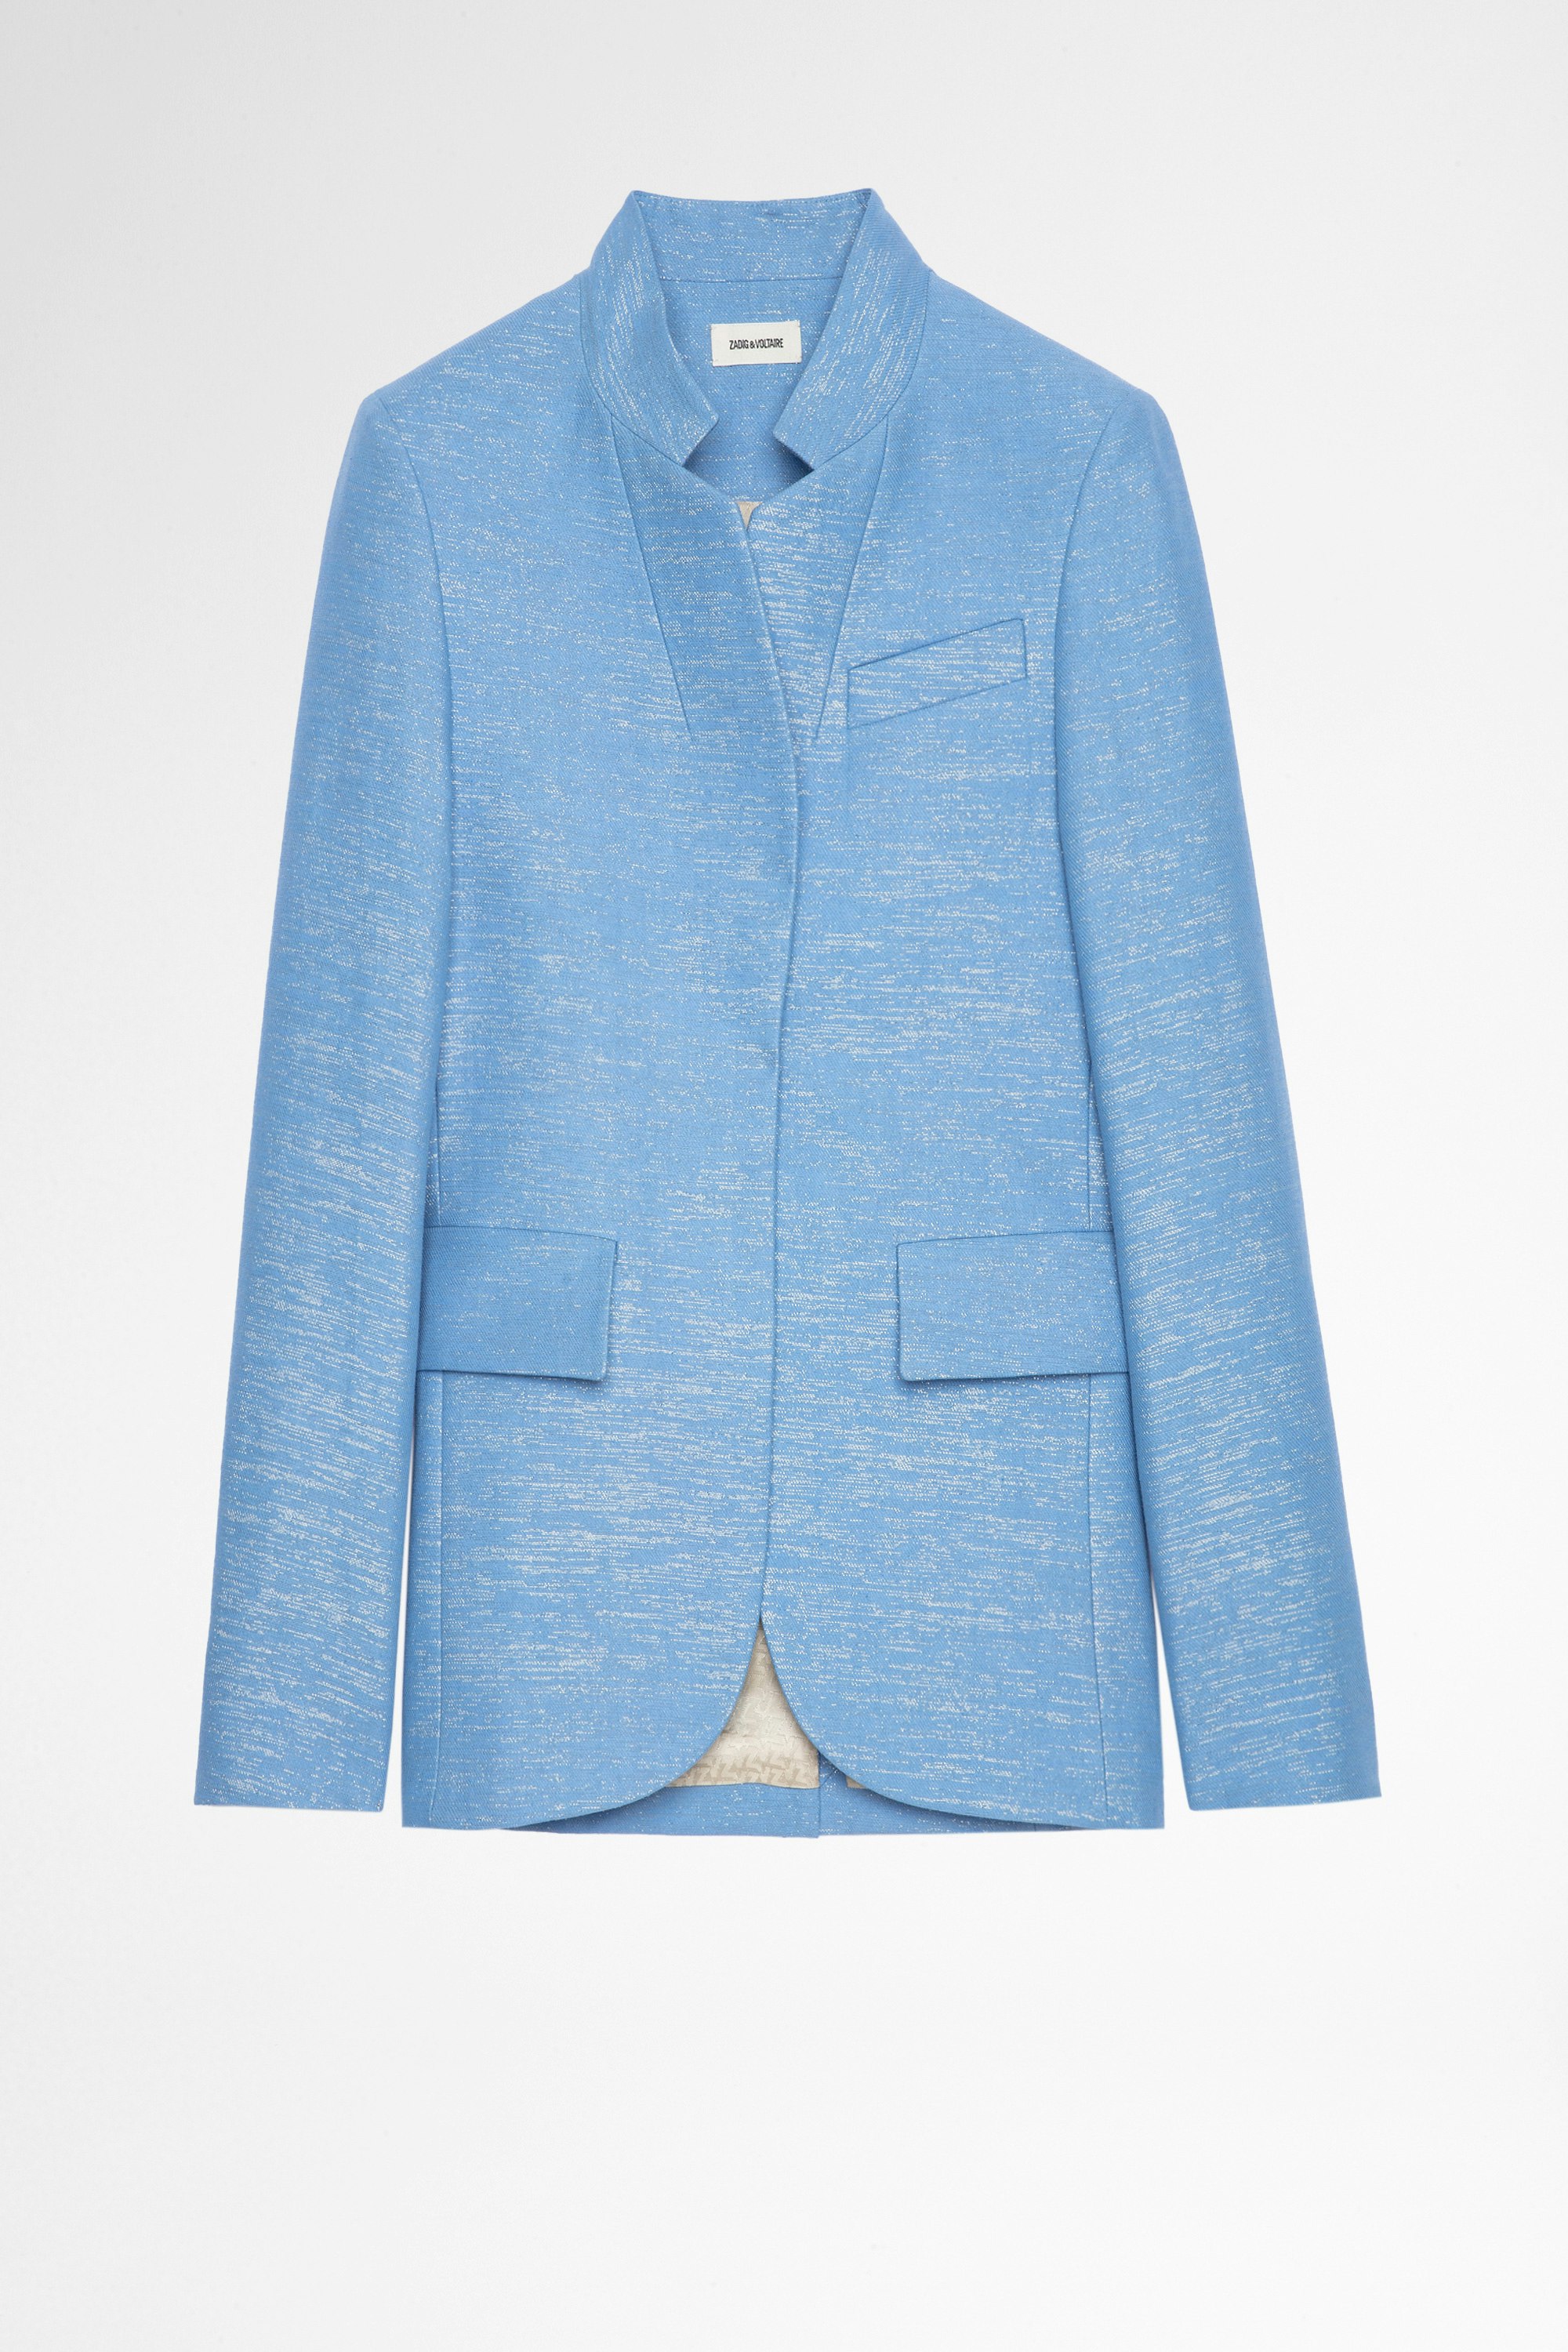 Very ジャケット Women's linen and cotton blazer in sky-blue with gold metallic threads